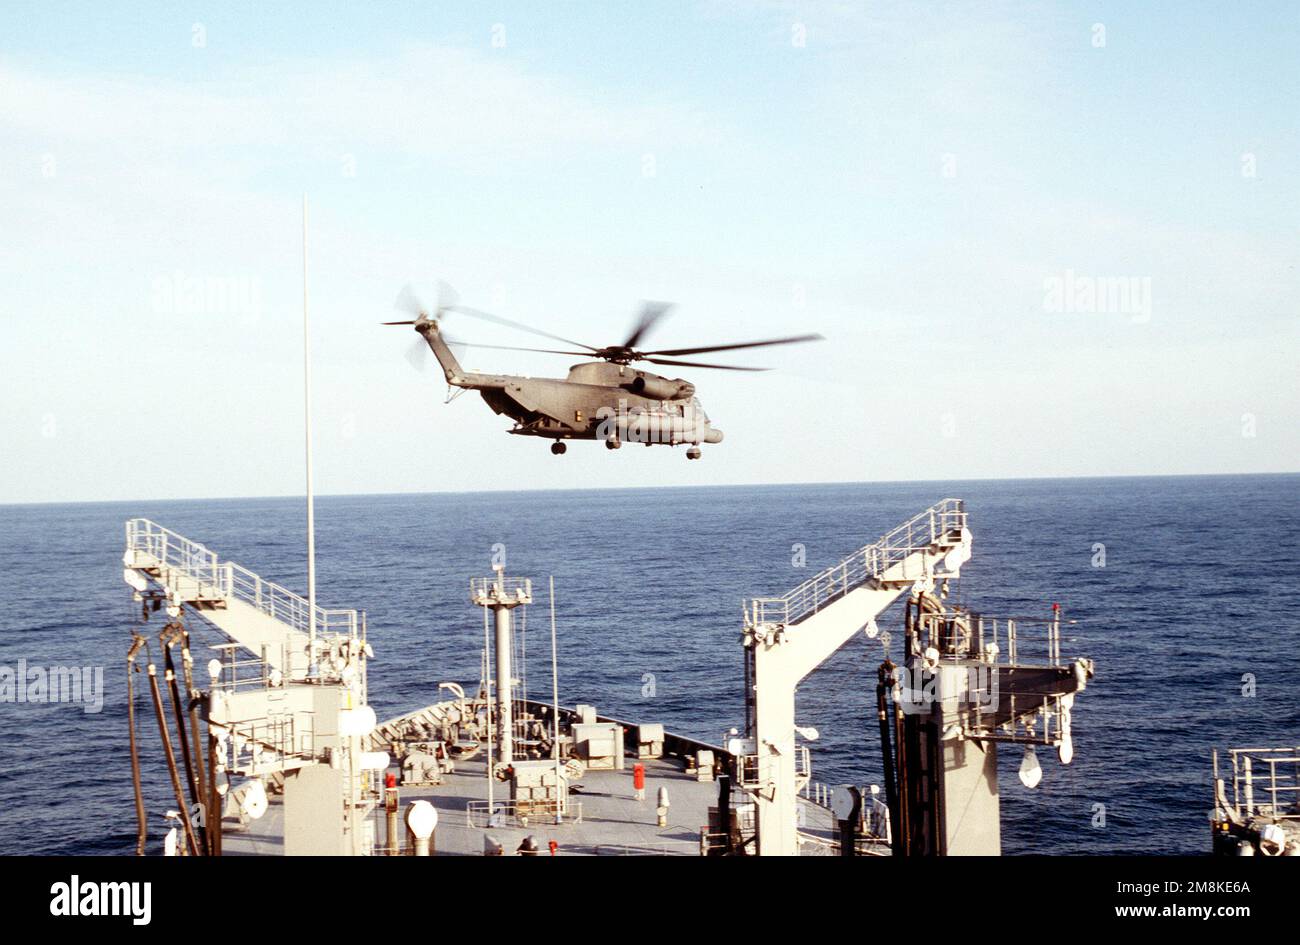 A US Air Force Special Operations MH-53 Pave Low helicopter flies over the USNS LEROY GRUMMAN during a search and seizure exercise with US Navy SEALs.(Exact date shot unknown). Country: Adriatic Sea Stock Photo